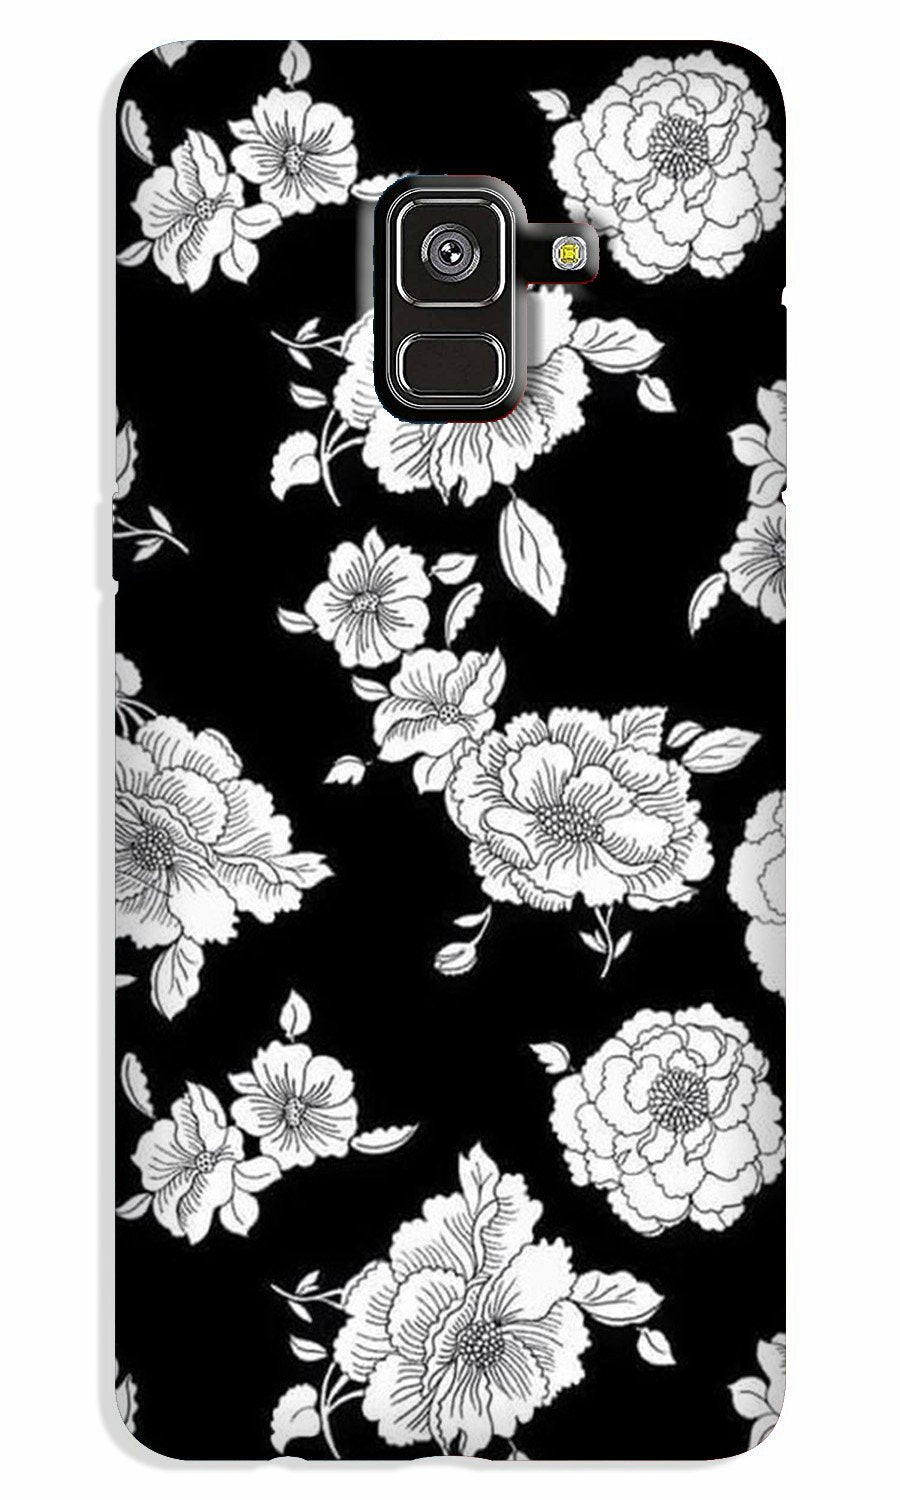 White flowers Black Background Case for Galaxy A8 Plus